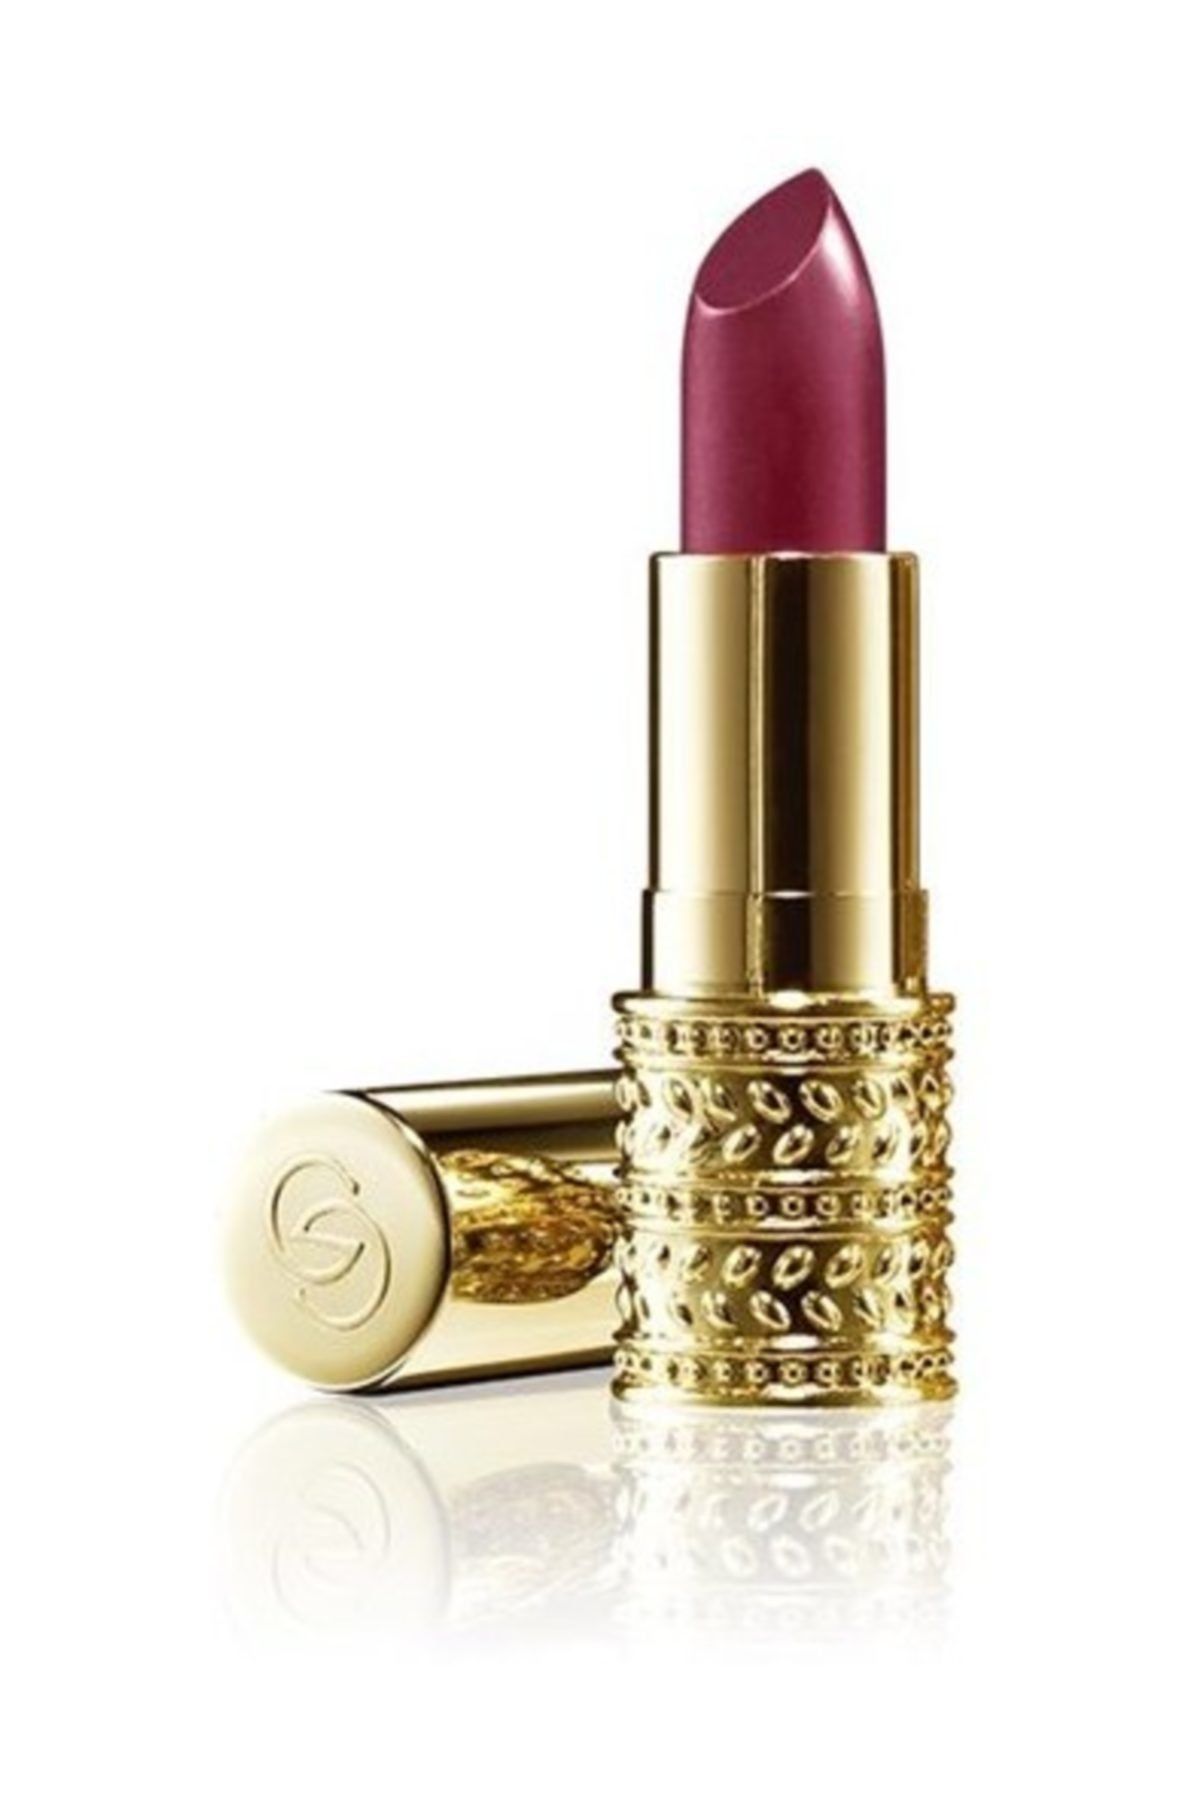 Oriflame Giordani Gold Jewel Ruj Red Attraction 31380 4 gr